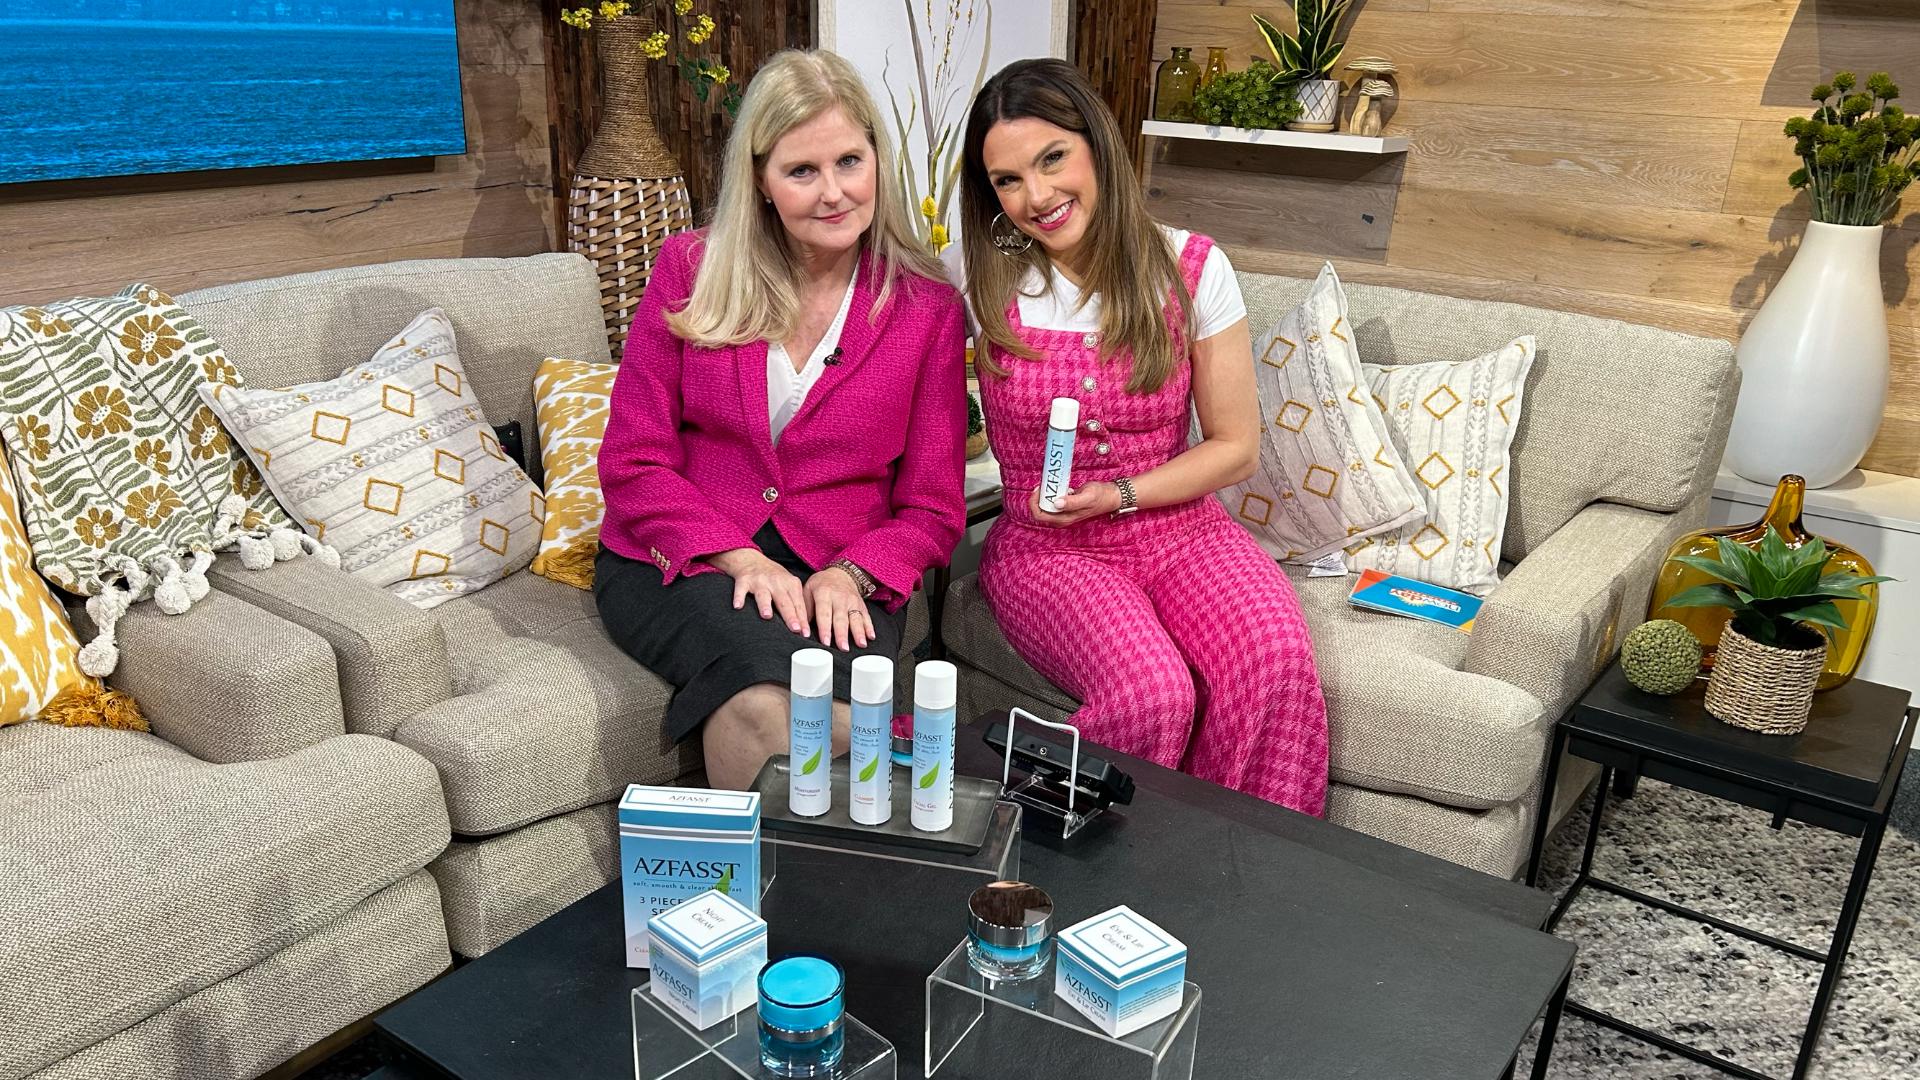 Dr. Anne Riordan's boutique skin care line harnesses the power of green tea botanicals to soften lines and wrinkles. Sponsored by Azfasst.